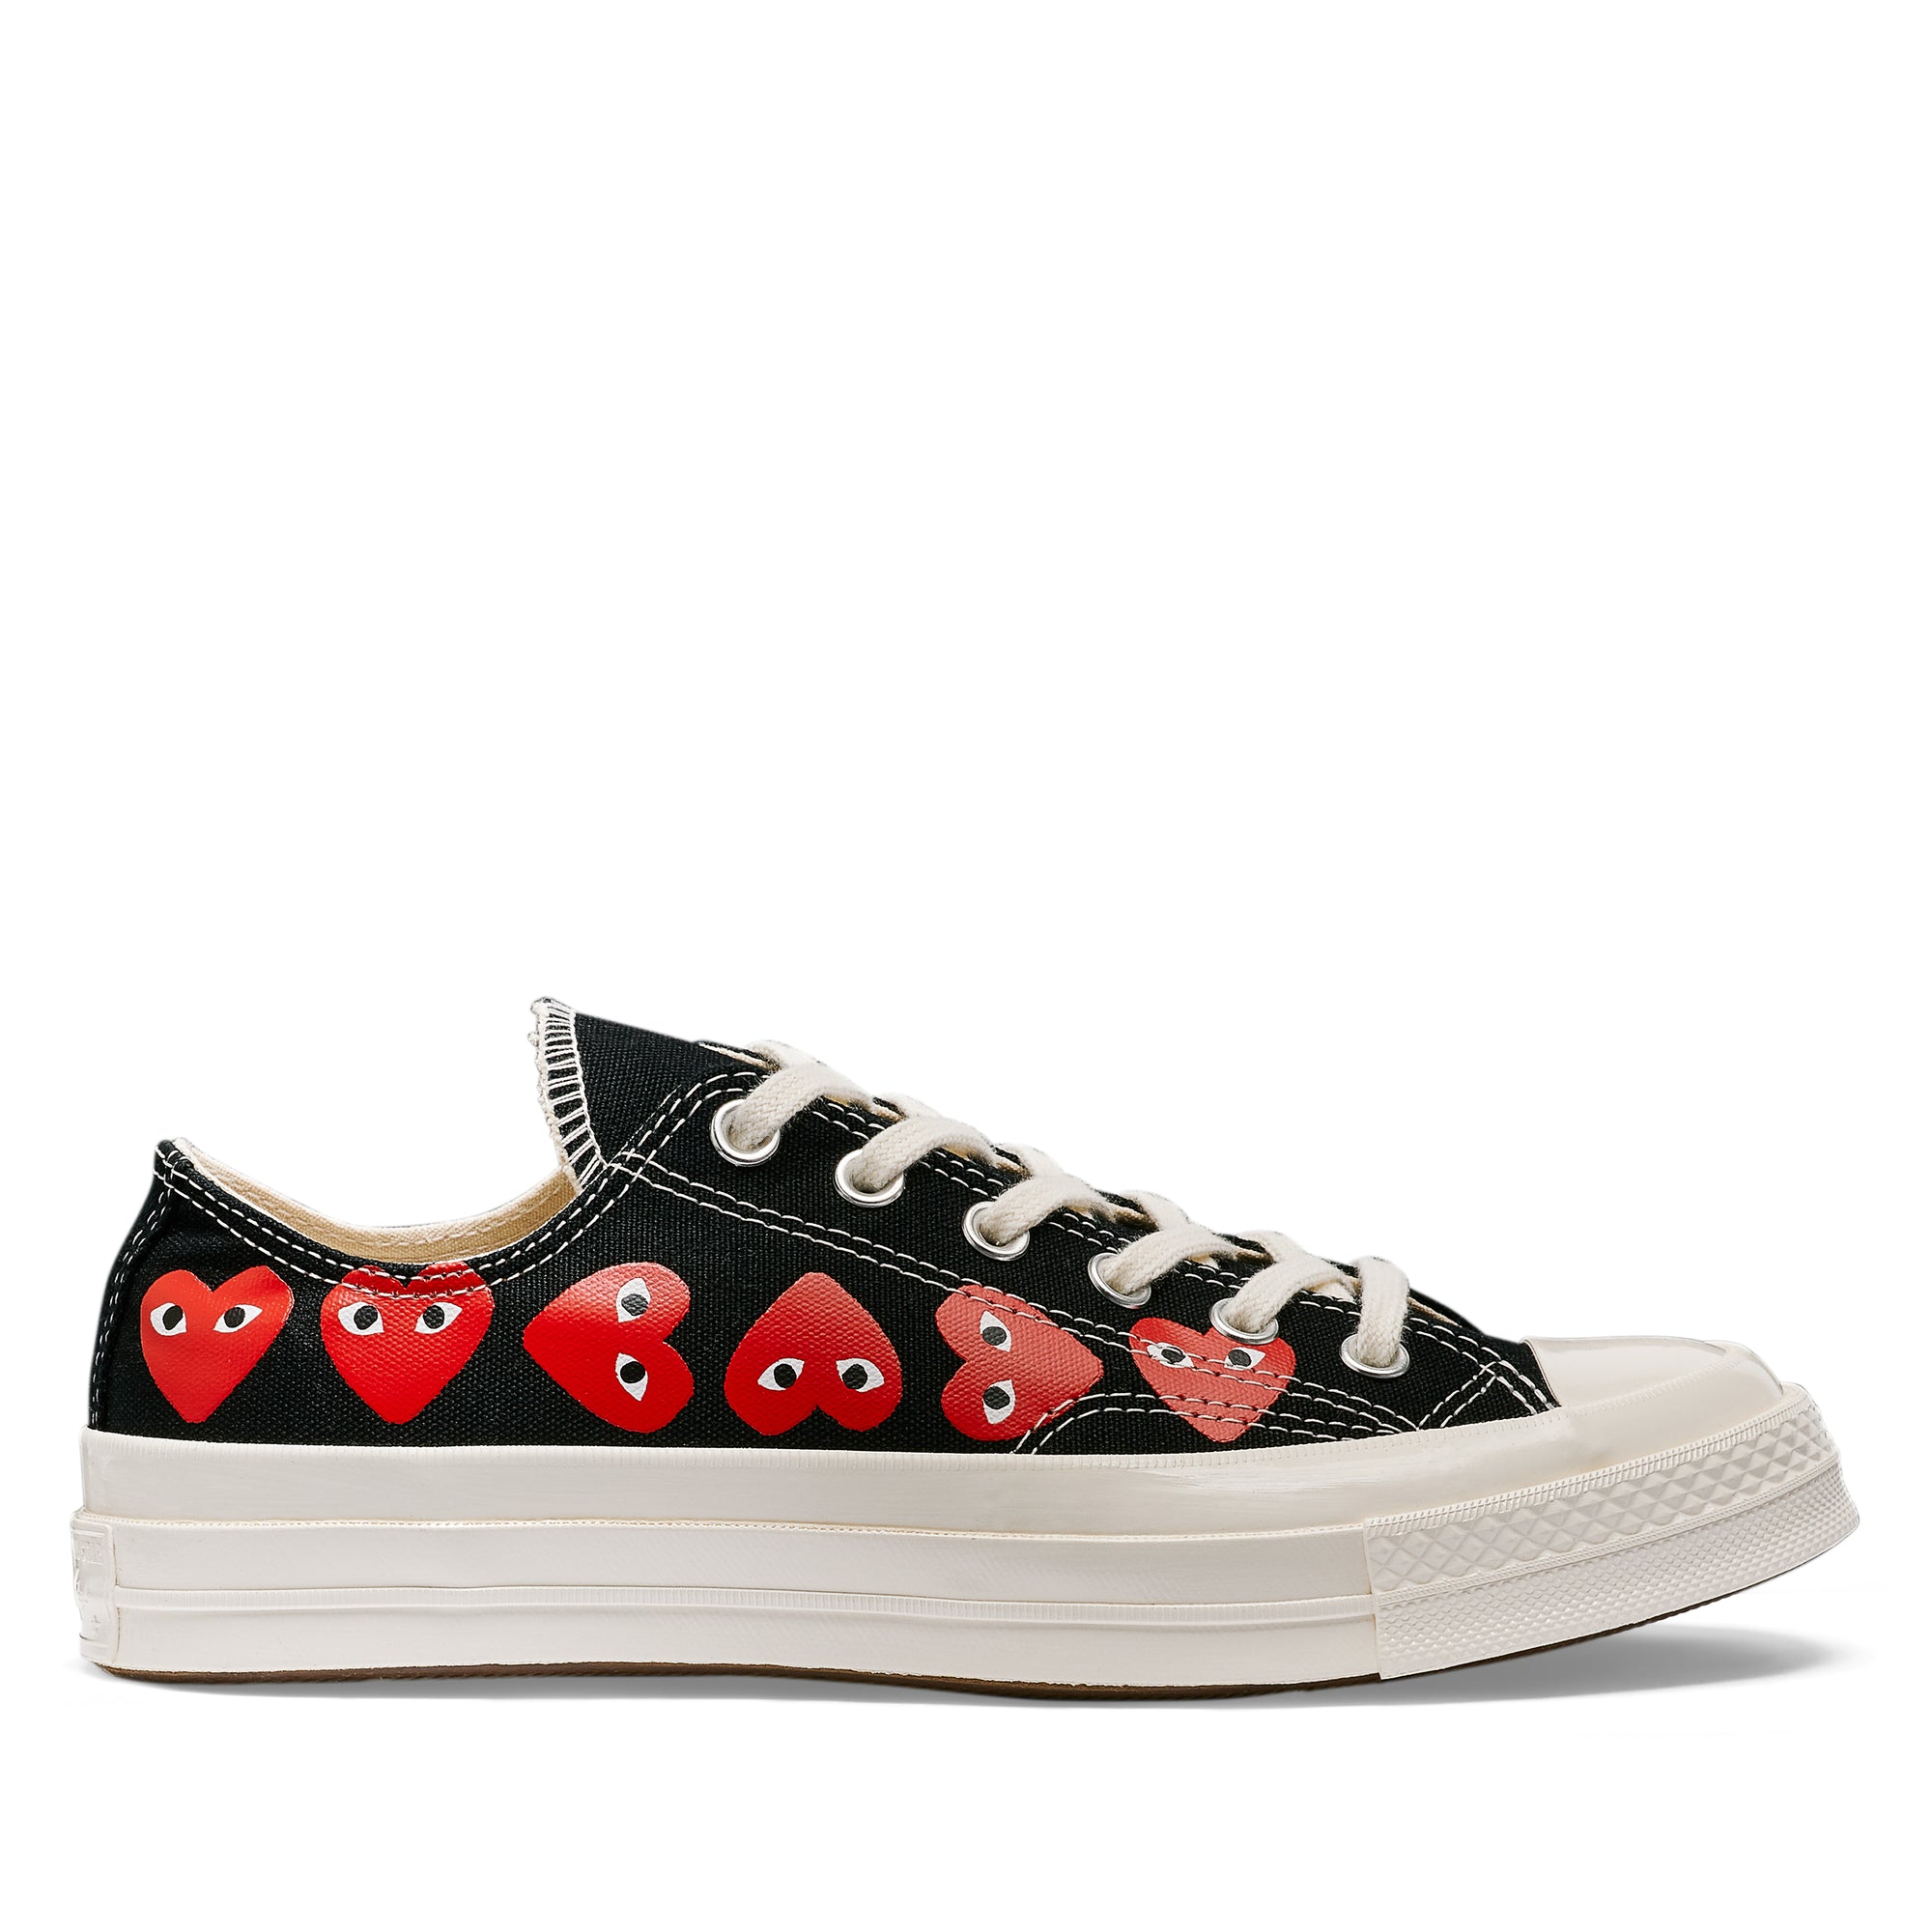 Play Converse - Multi Red Heart Chuck Taylor All Star '70 Low Sneakers - (Black) view 1